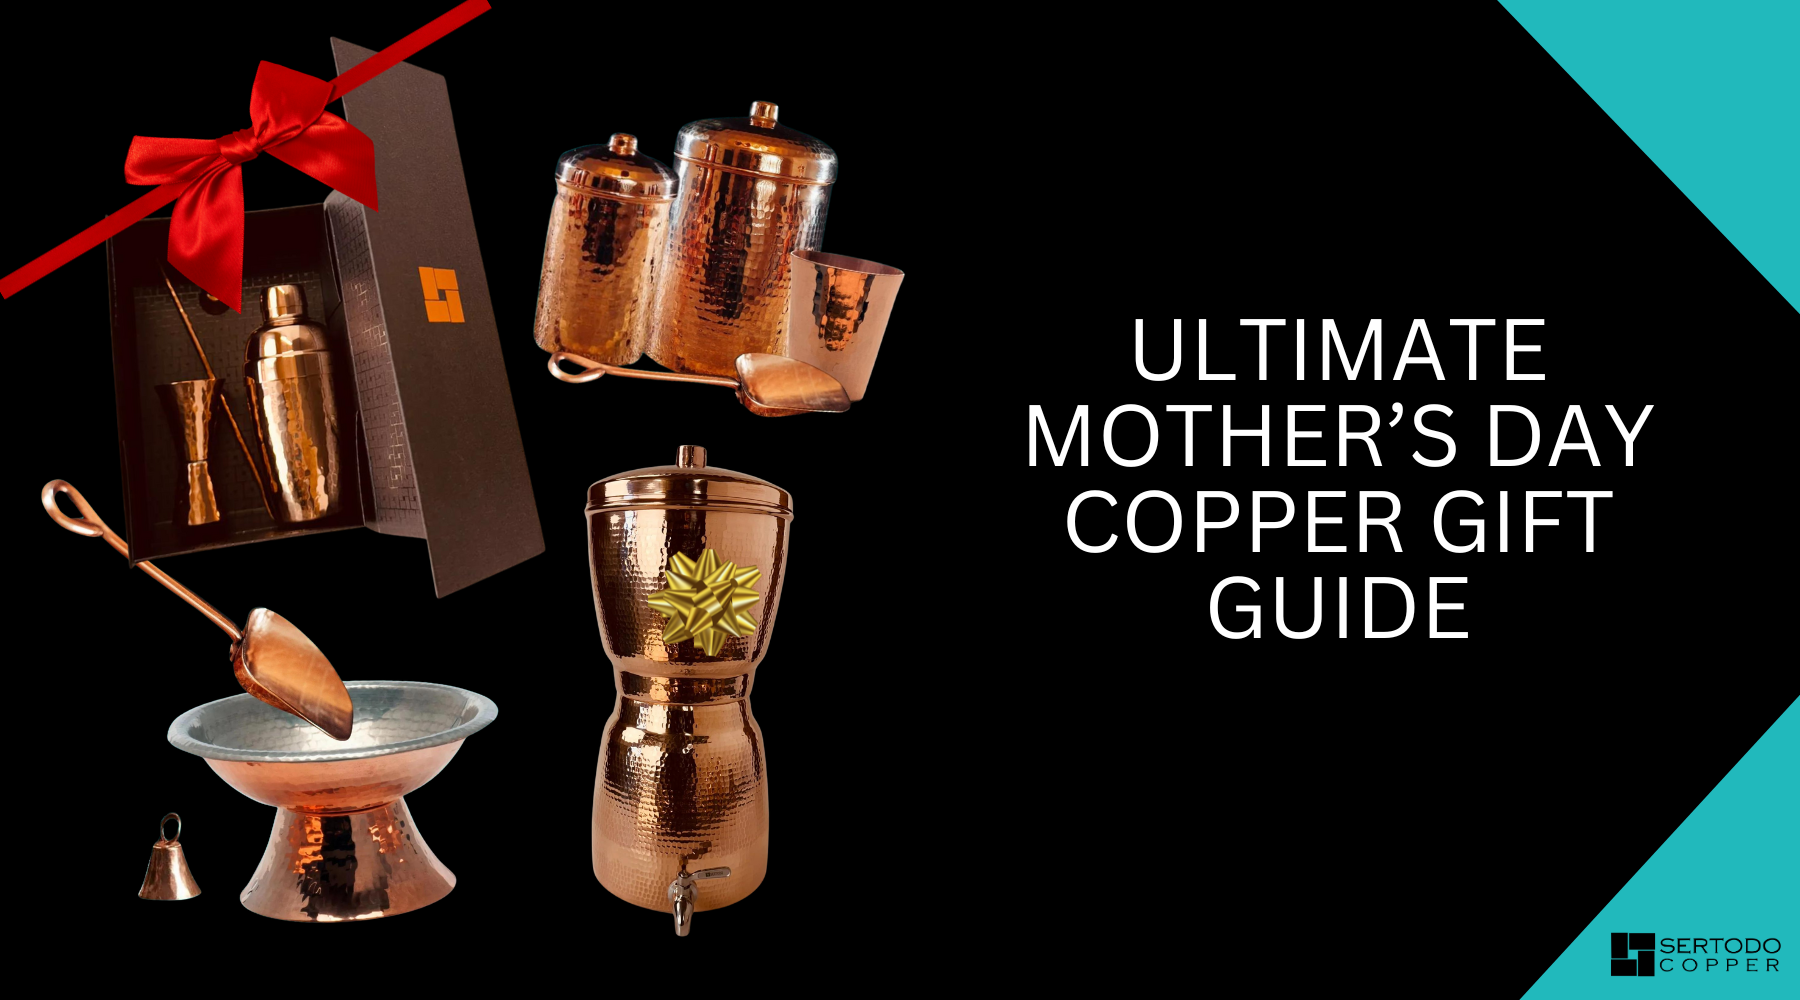 Ultimate Mother's Day Copper Gift Guide